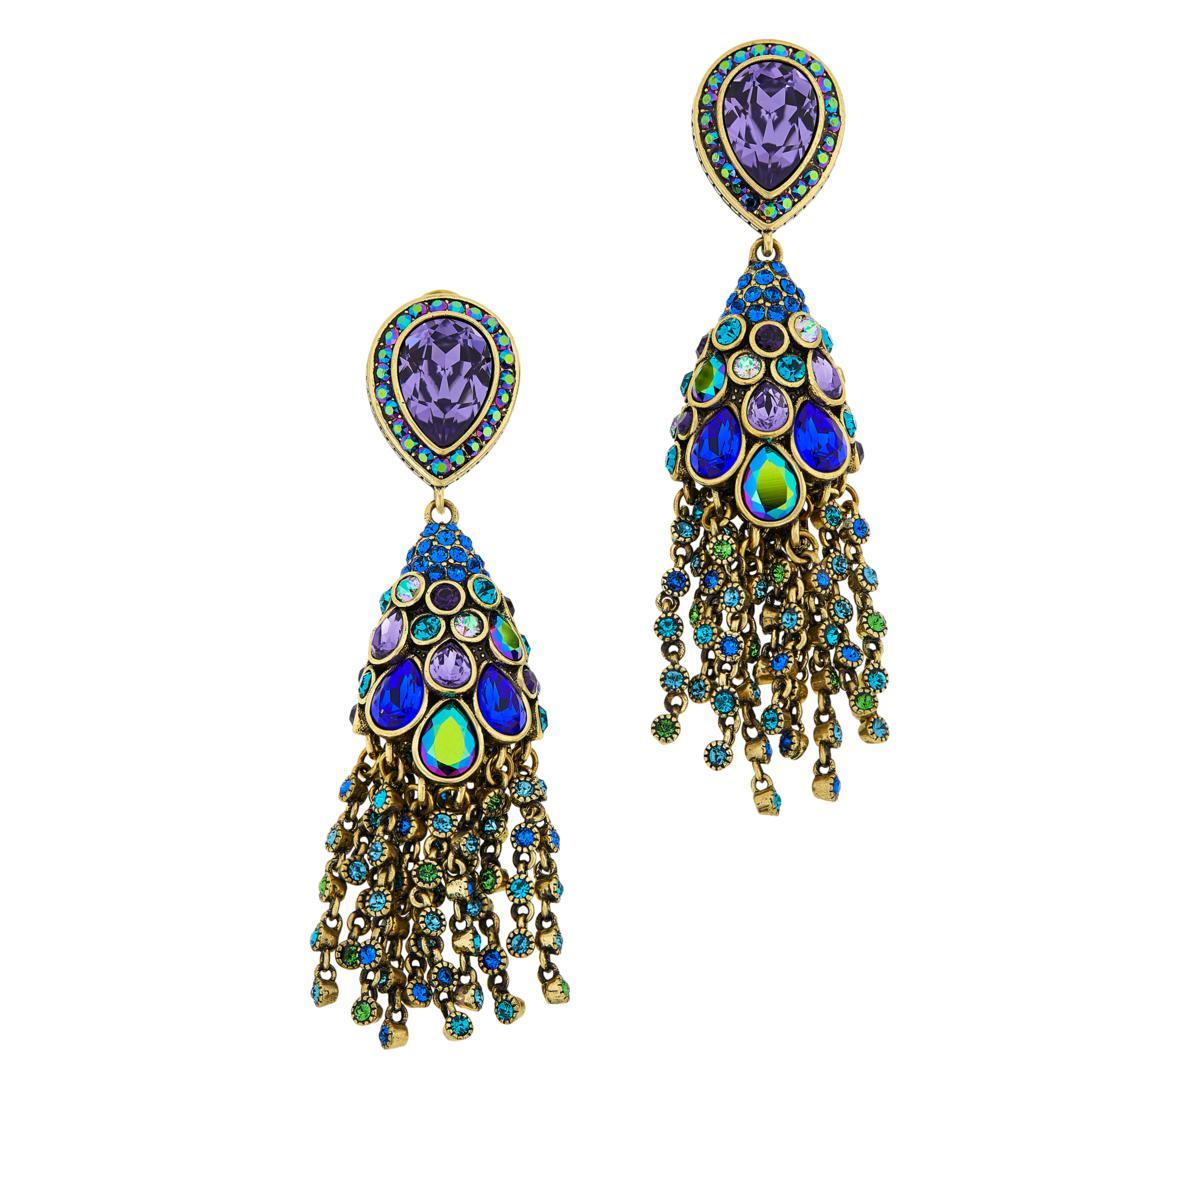 Utterly feminine and cheerfully colorful, beautiful pair of earring pierced with omega backs in a multitude of beautiful peacock colors to enhance any outfit with a showstopper look. A must for a one of a kind look.

Measures approx 3-3/4